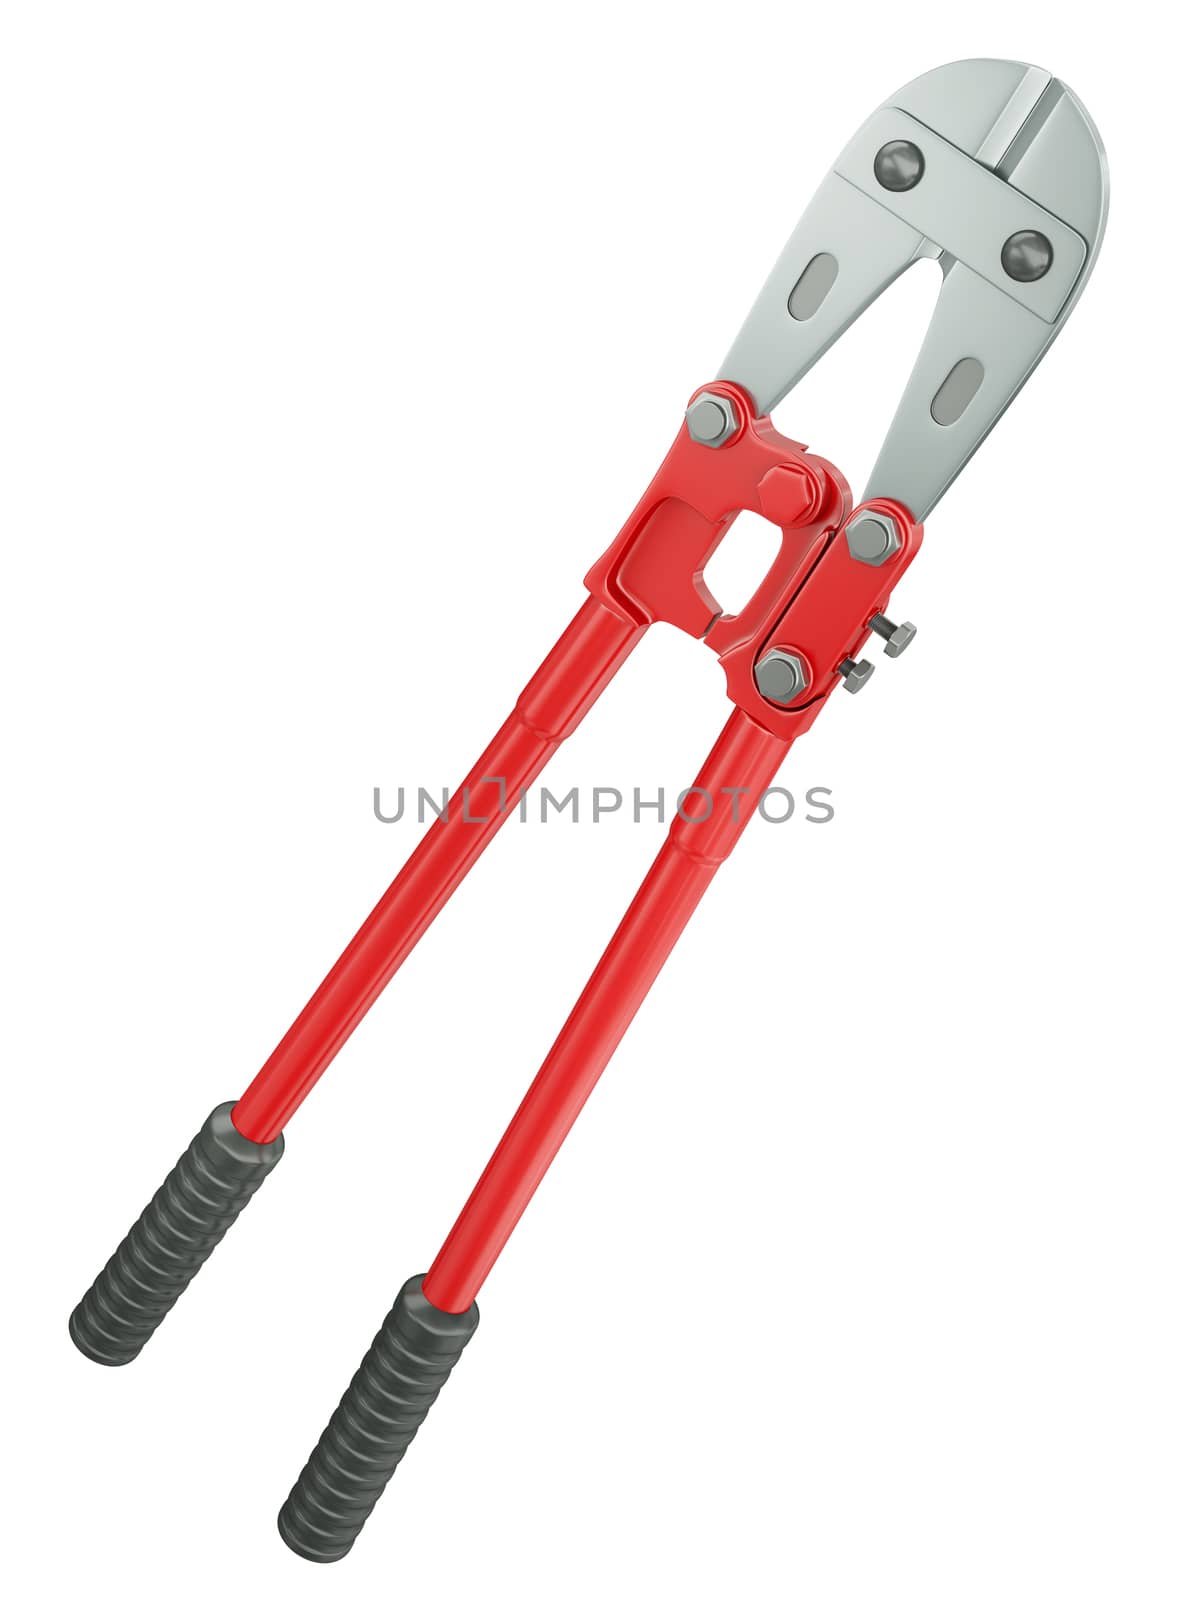 Red bolt cutter isolated on a white background. 3D rendered illustration.